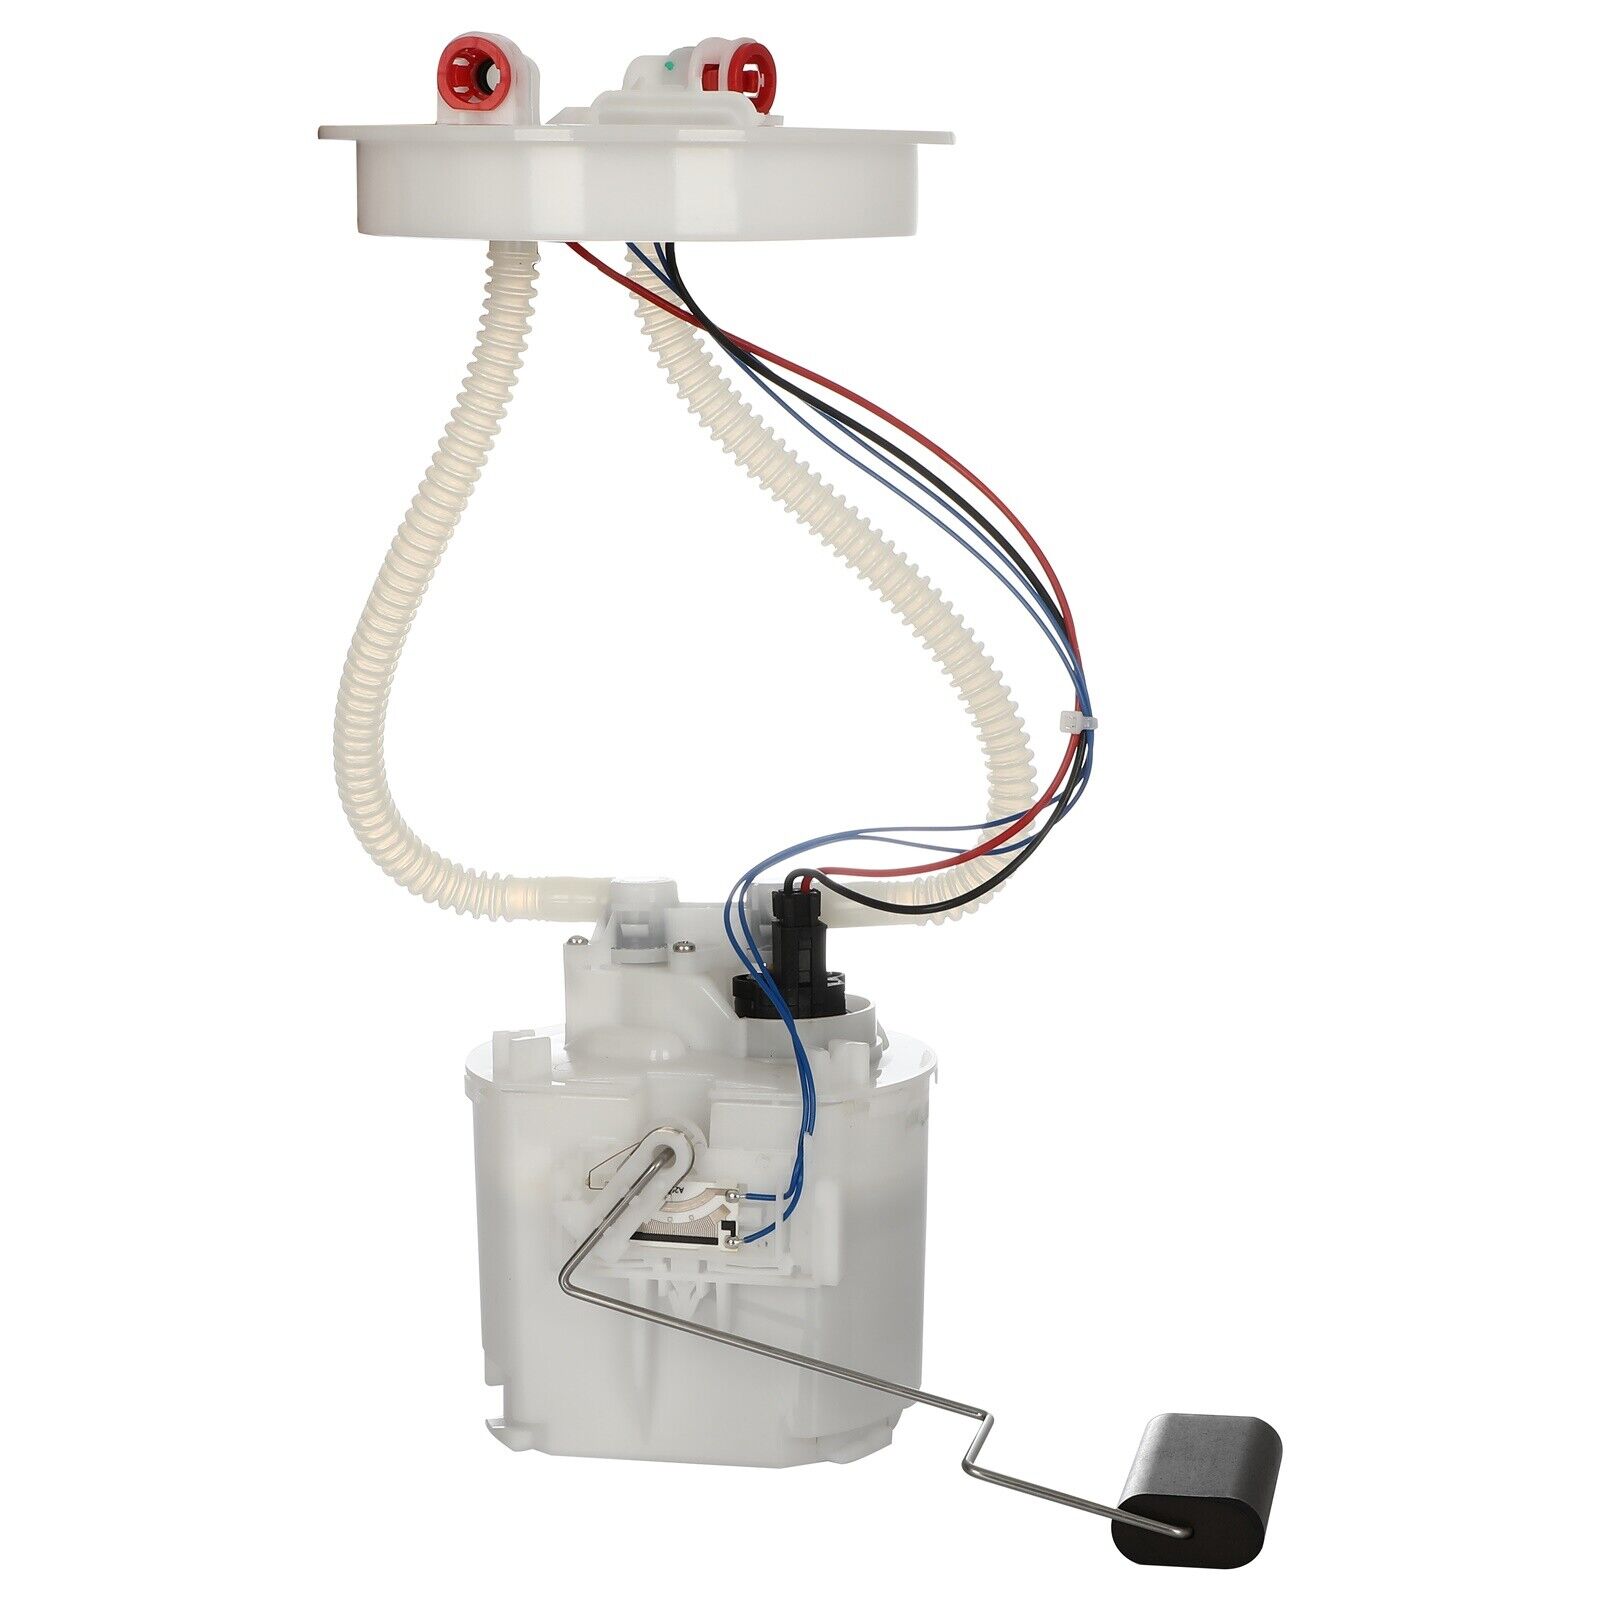 Fits Ford Focus 2.0L 2000-2004   Electrical Fuel Pump Module Aseembly E10547M